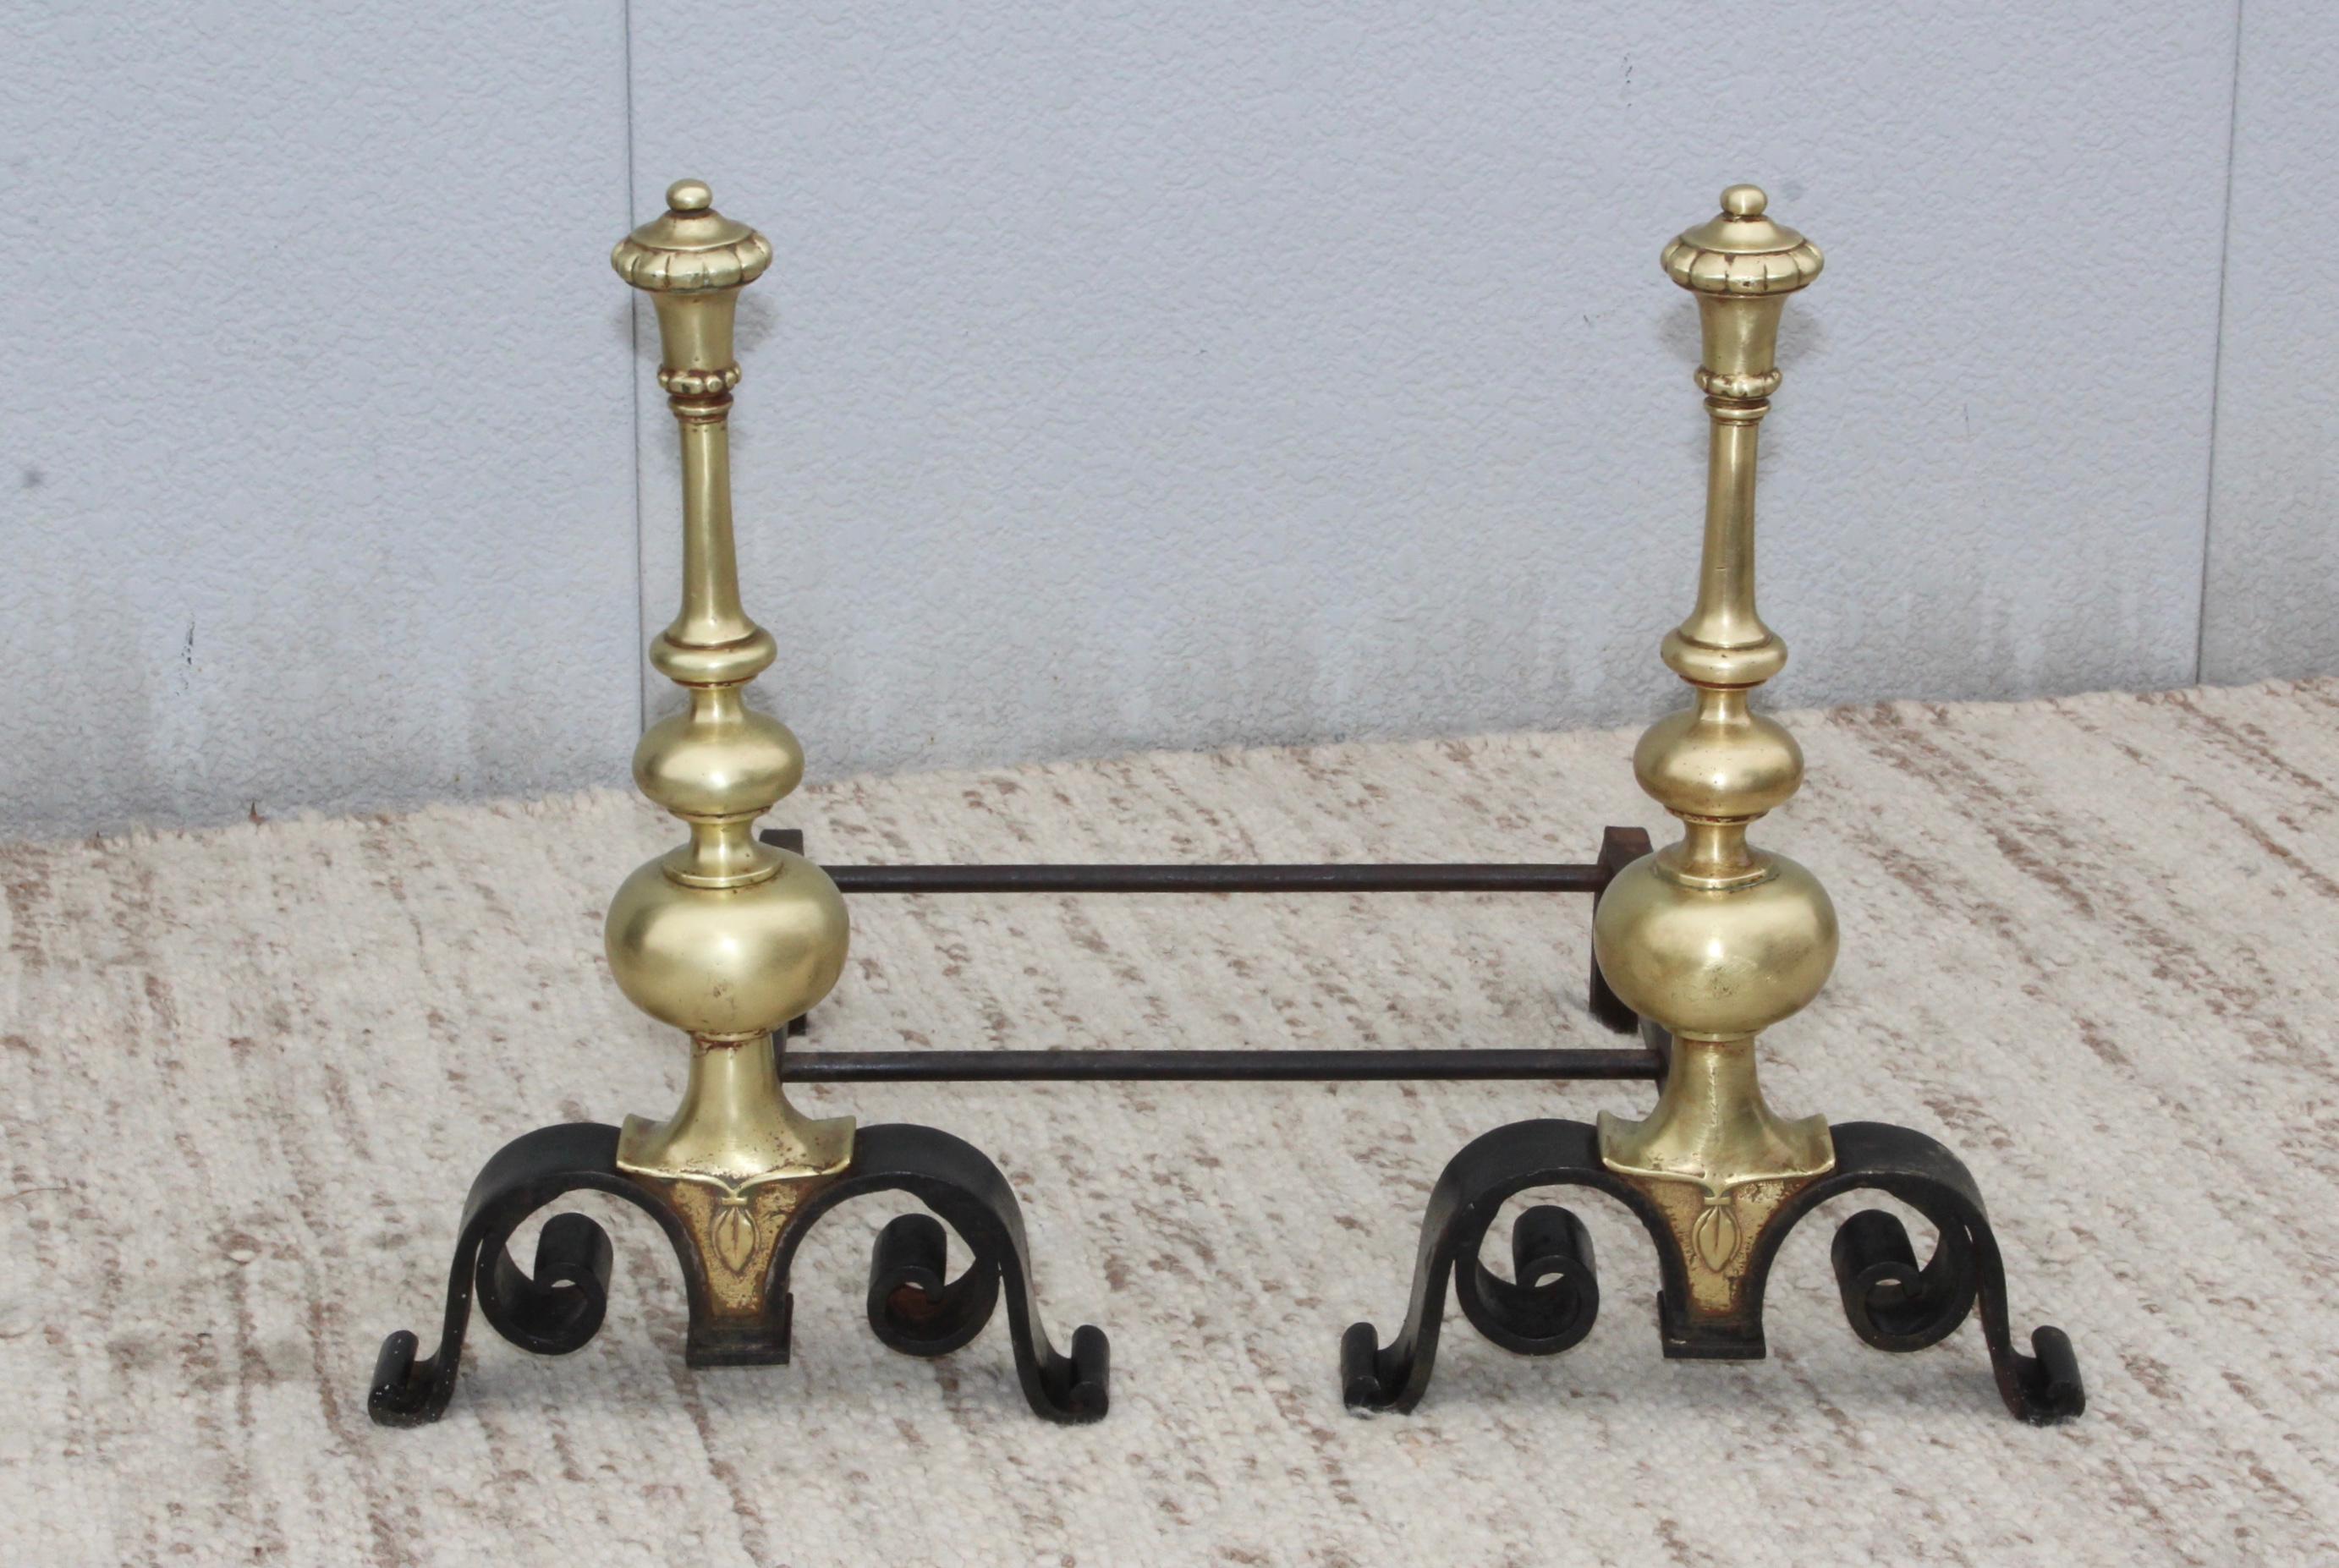 Stunning 1930s bronze and iron andirons from the Biltmore Hotel in NYC. in vintage condition well made and very heavy.